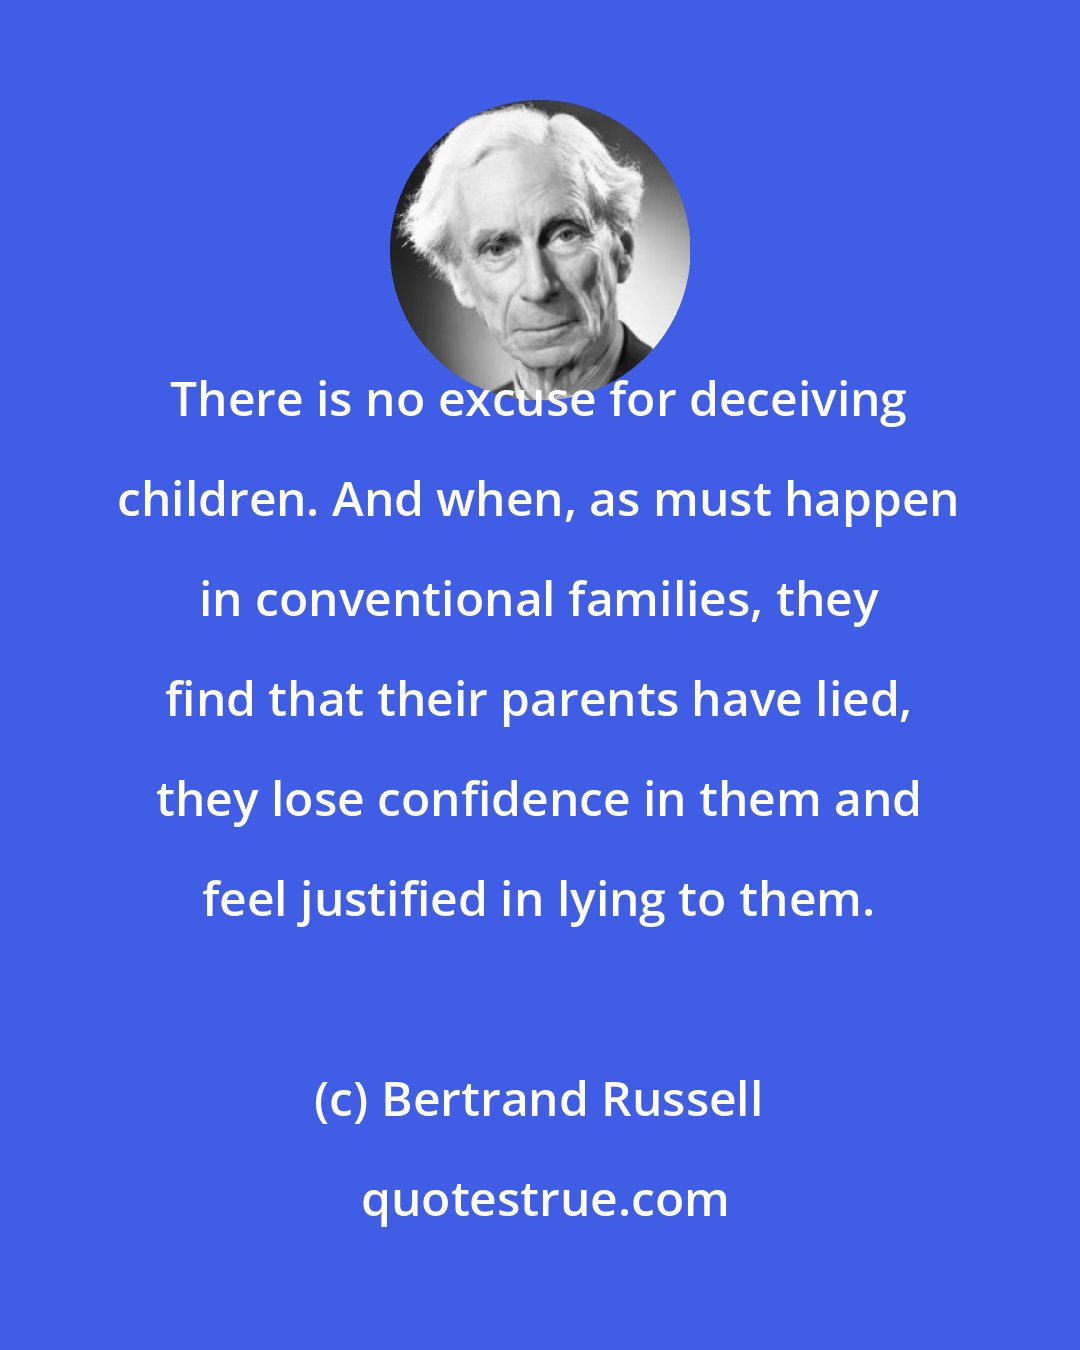 Bertrand Russell: There is no excuse for deceiving children. And when, as must happen in conventional families, they find that their parents have lied, they lose confidence in them and feel justified in lying to them.